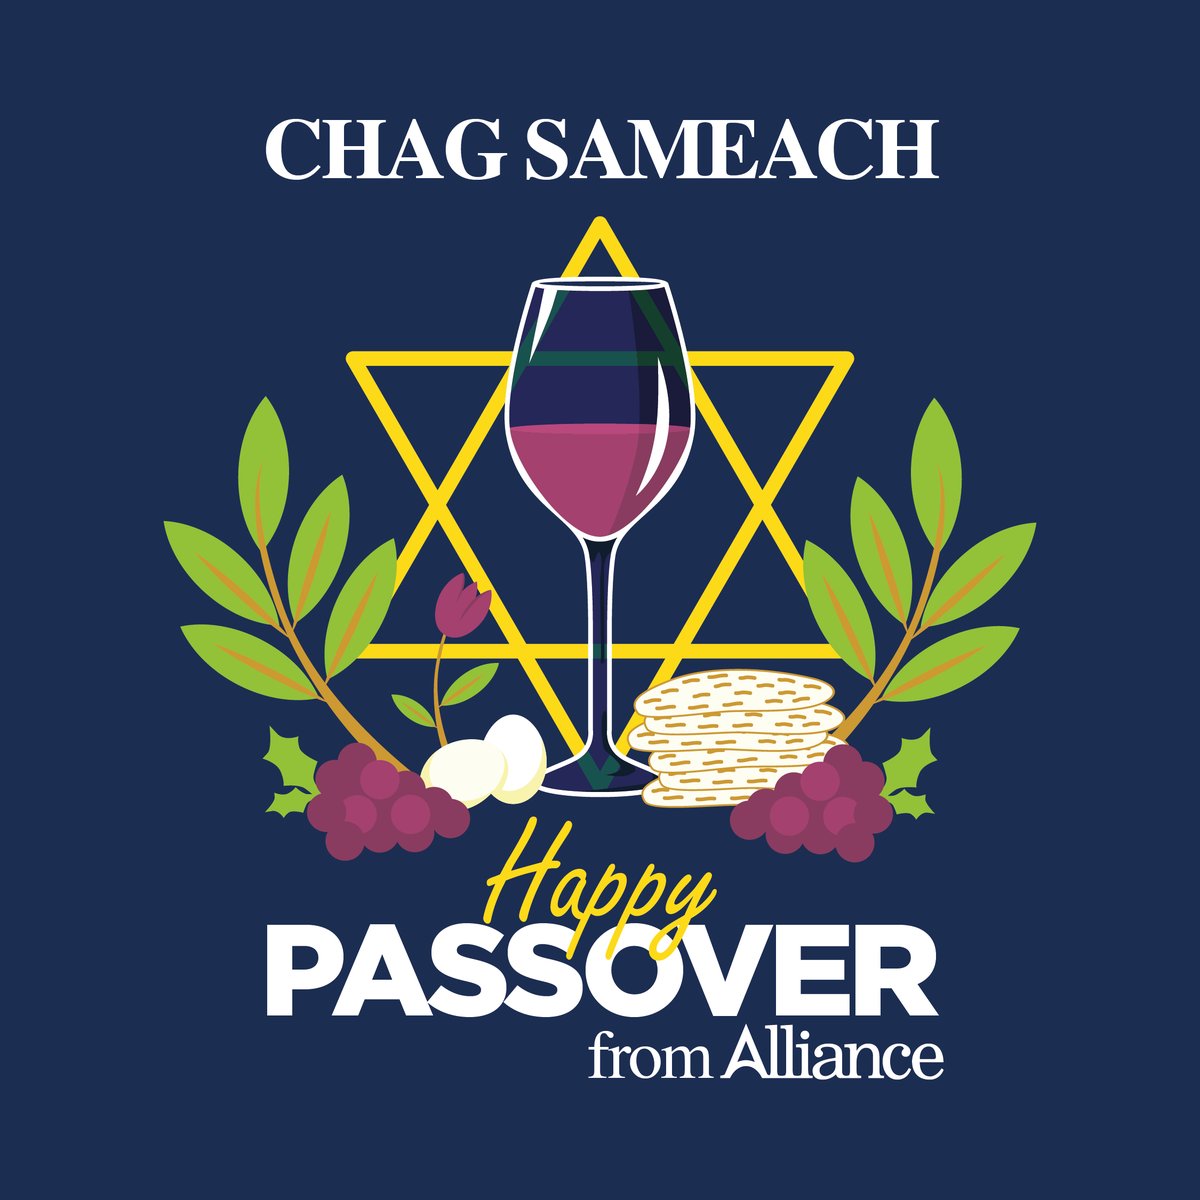 Wishing our Jewish friends across NI and the rest of the world a very happy Passover. Chag Sameach!